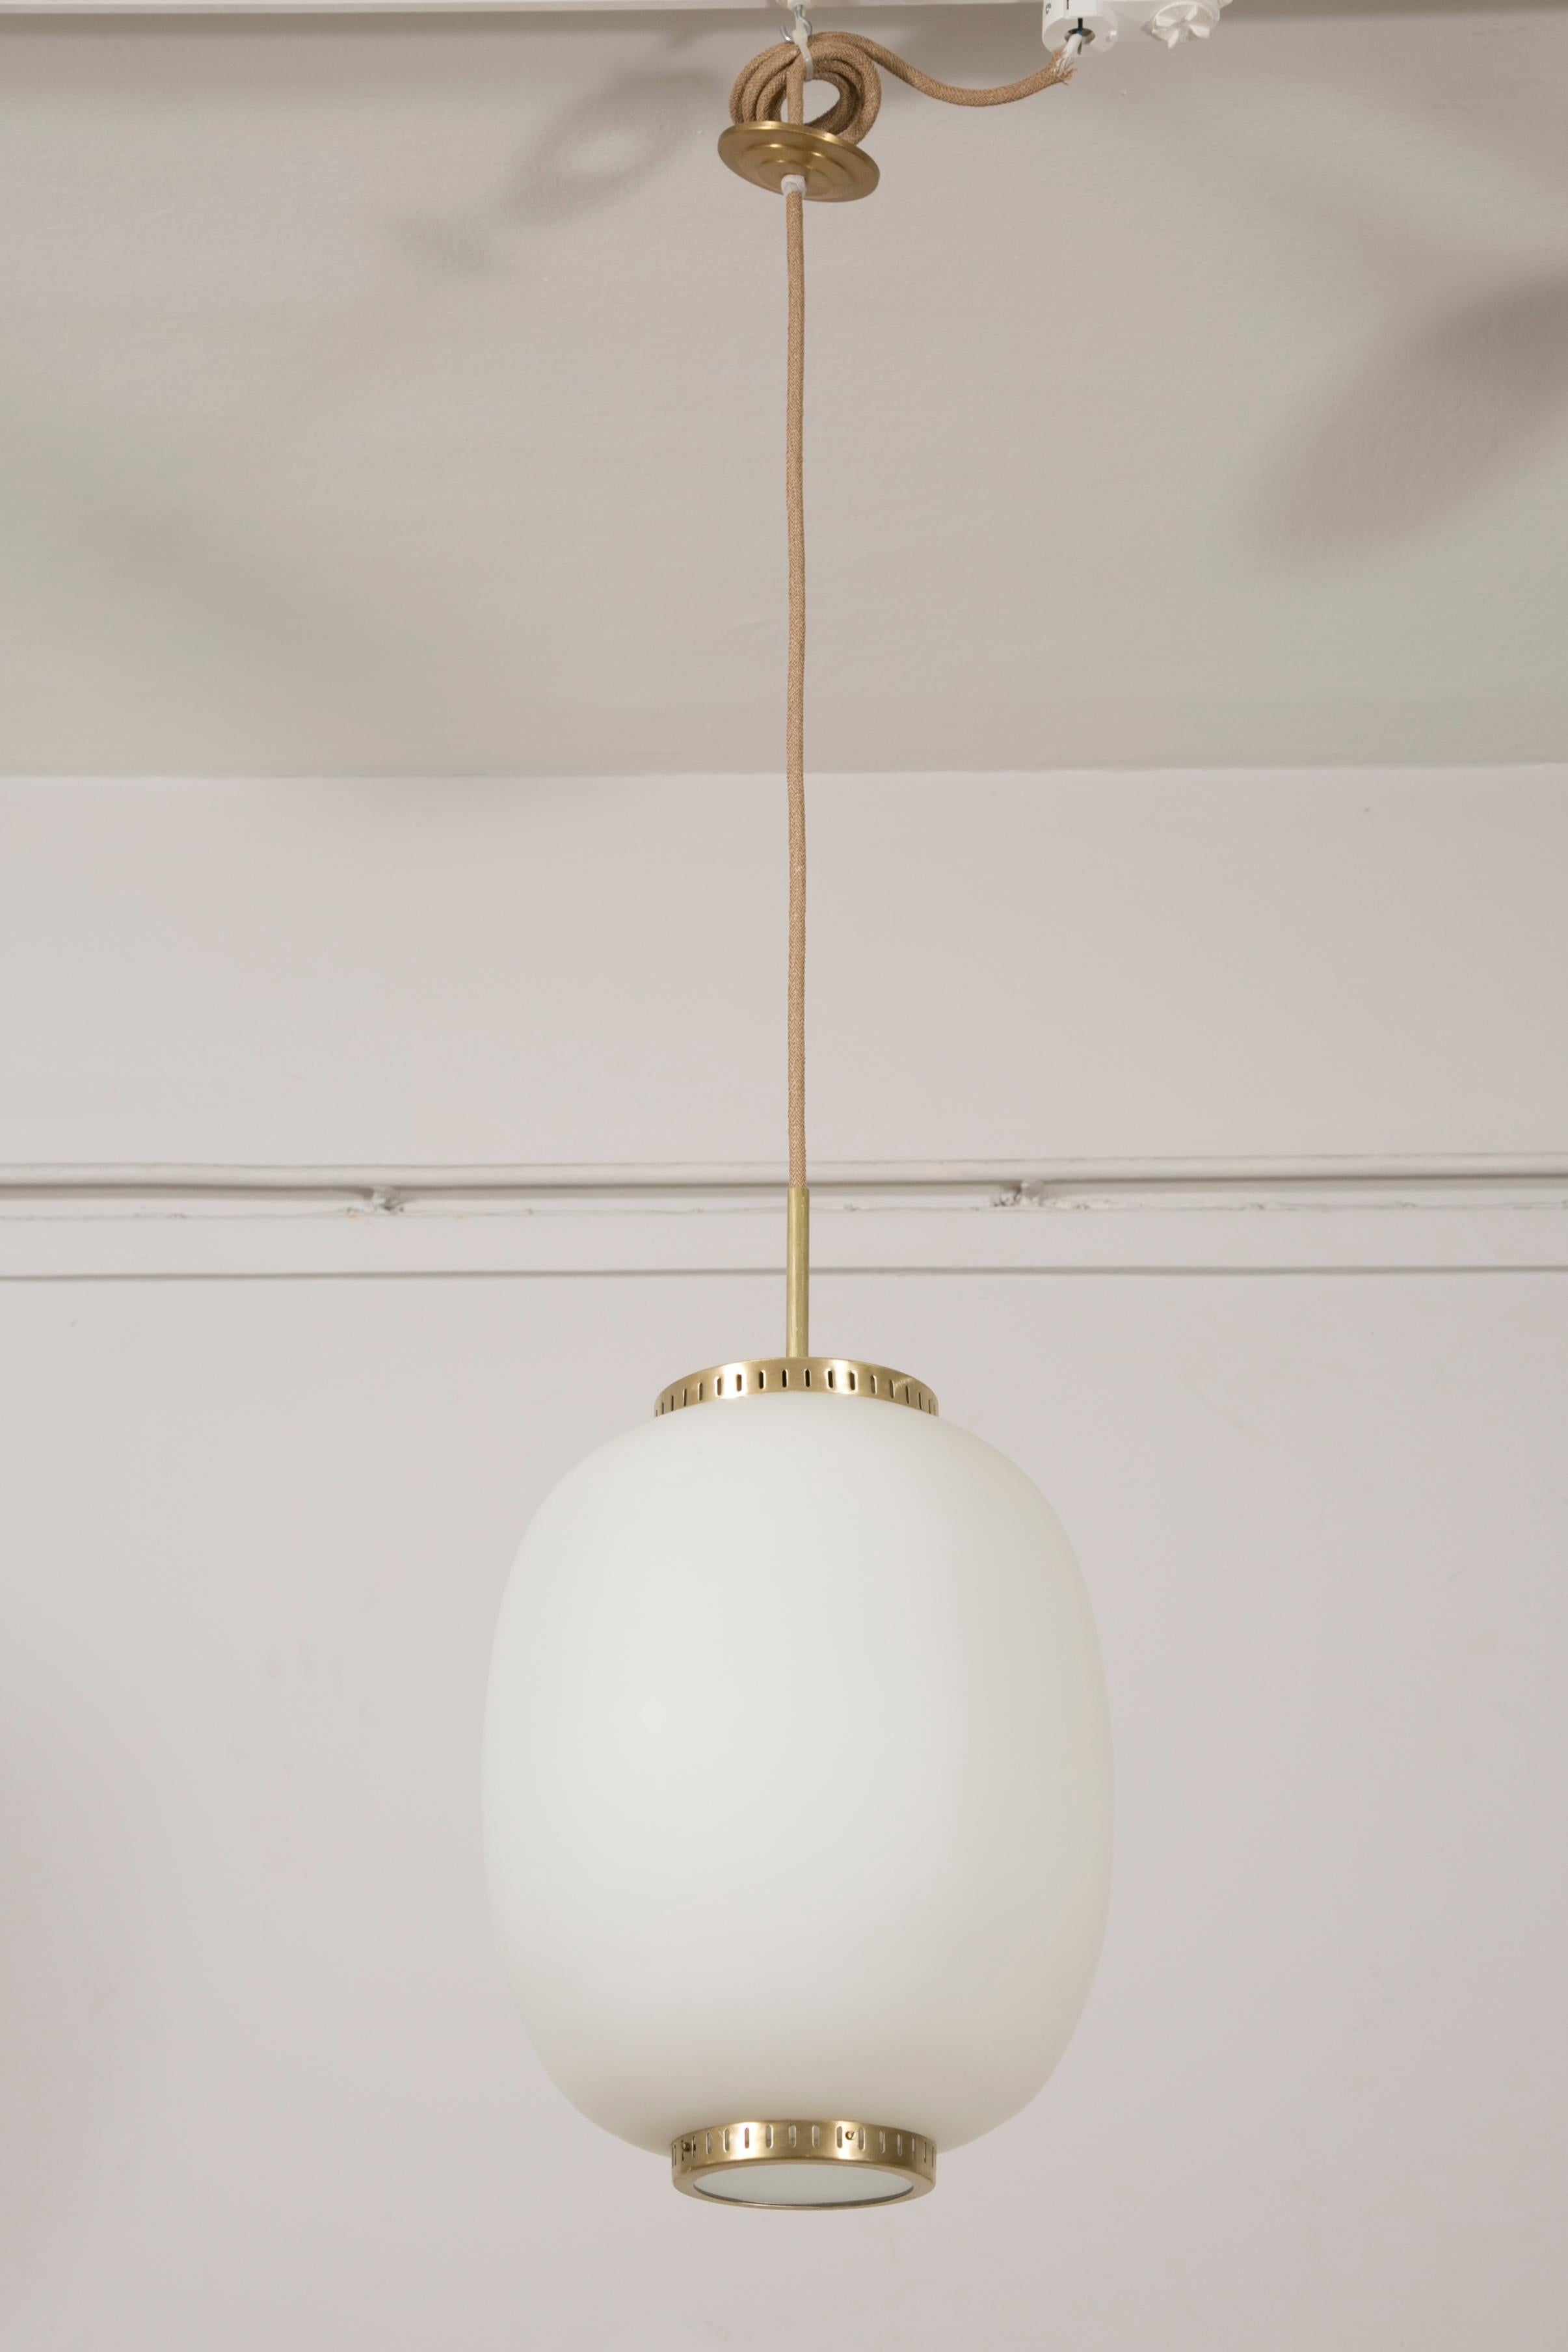 Collection of 11 Opaline Glass and Brass Ceiling Fixtures, Bent Karlby for Lyfa 1